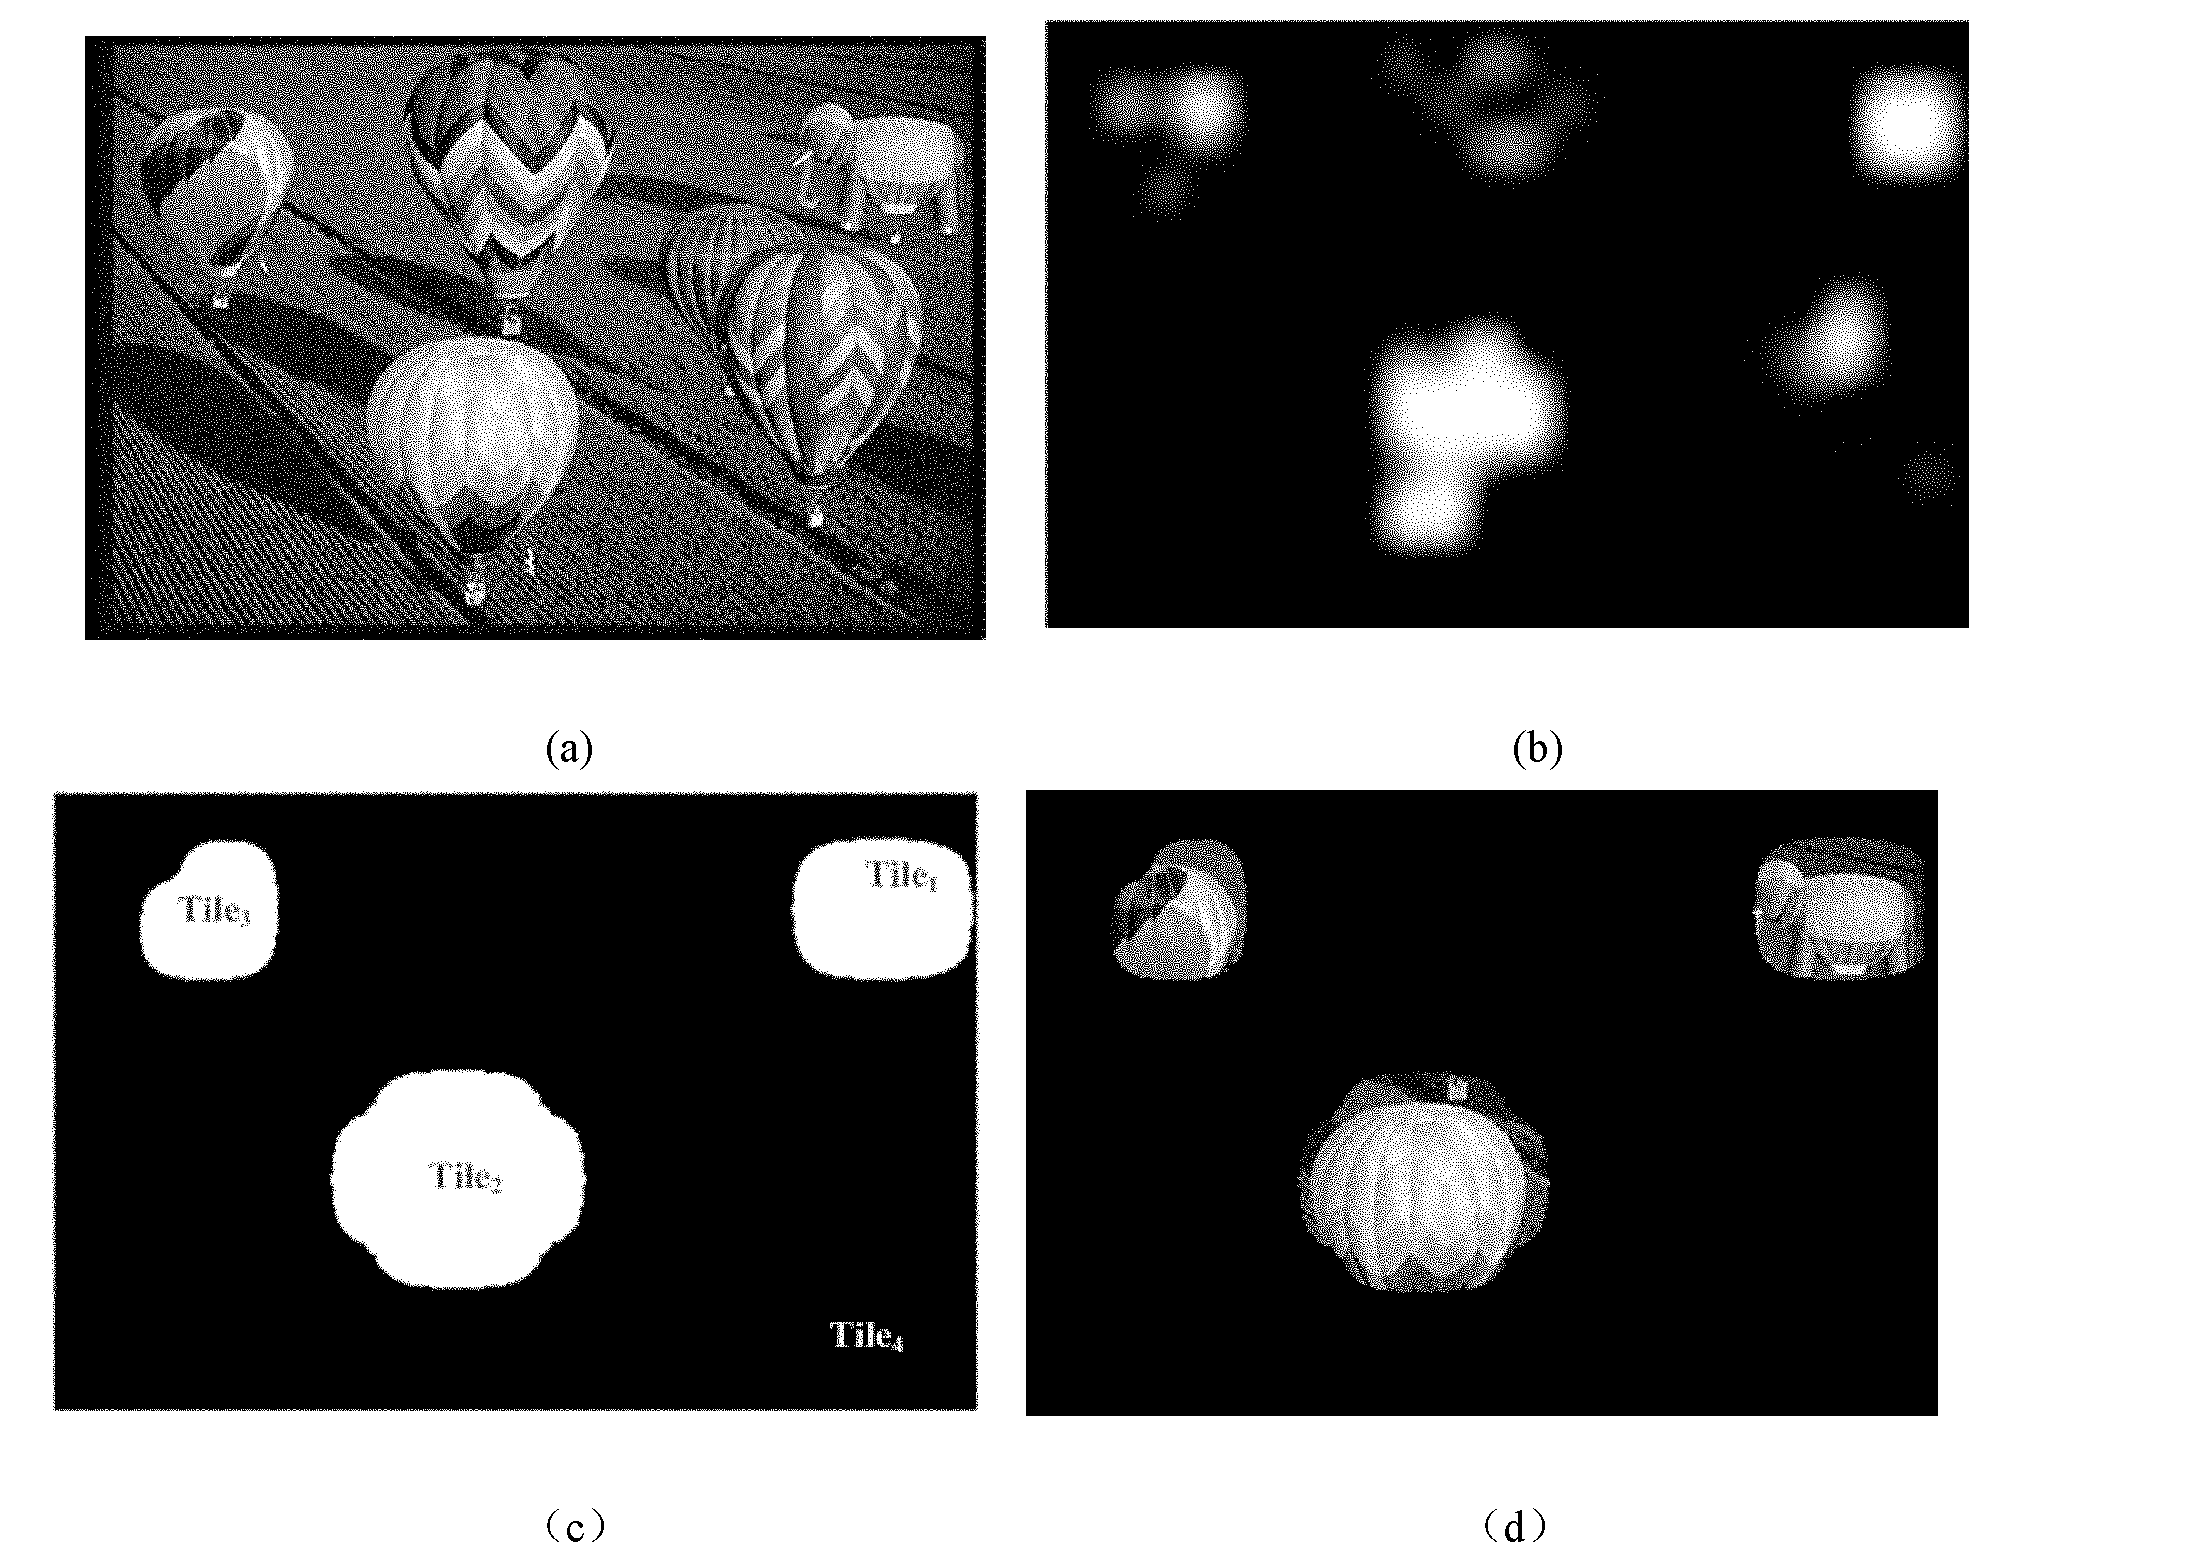 Method for encoding and decoding JPEG2000 image based on vision potential attention target area